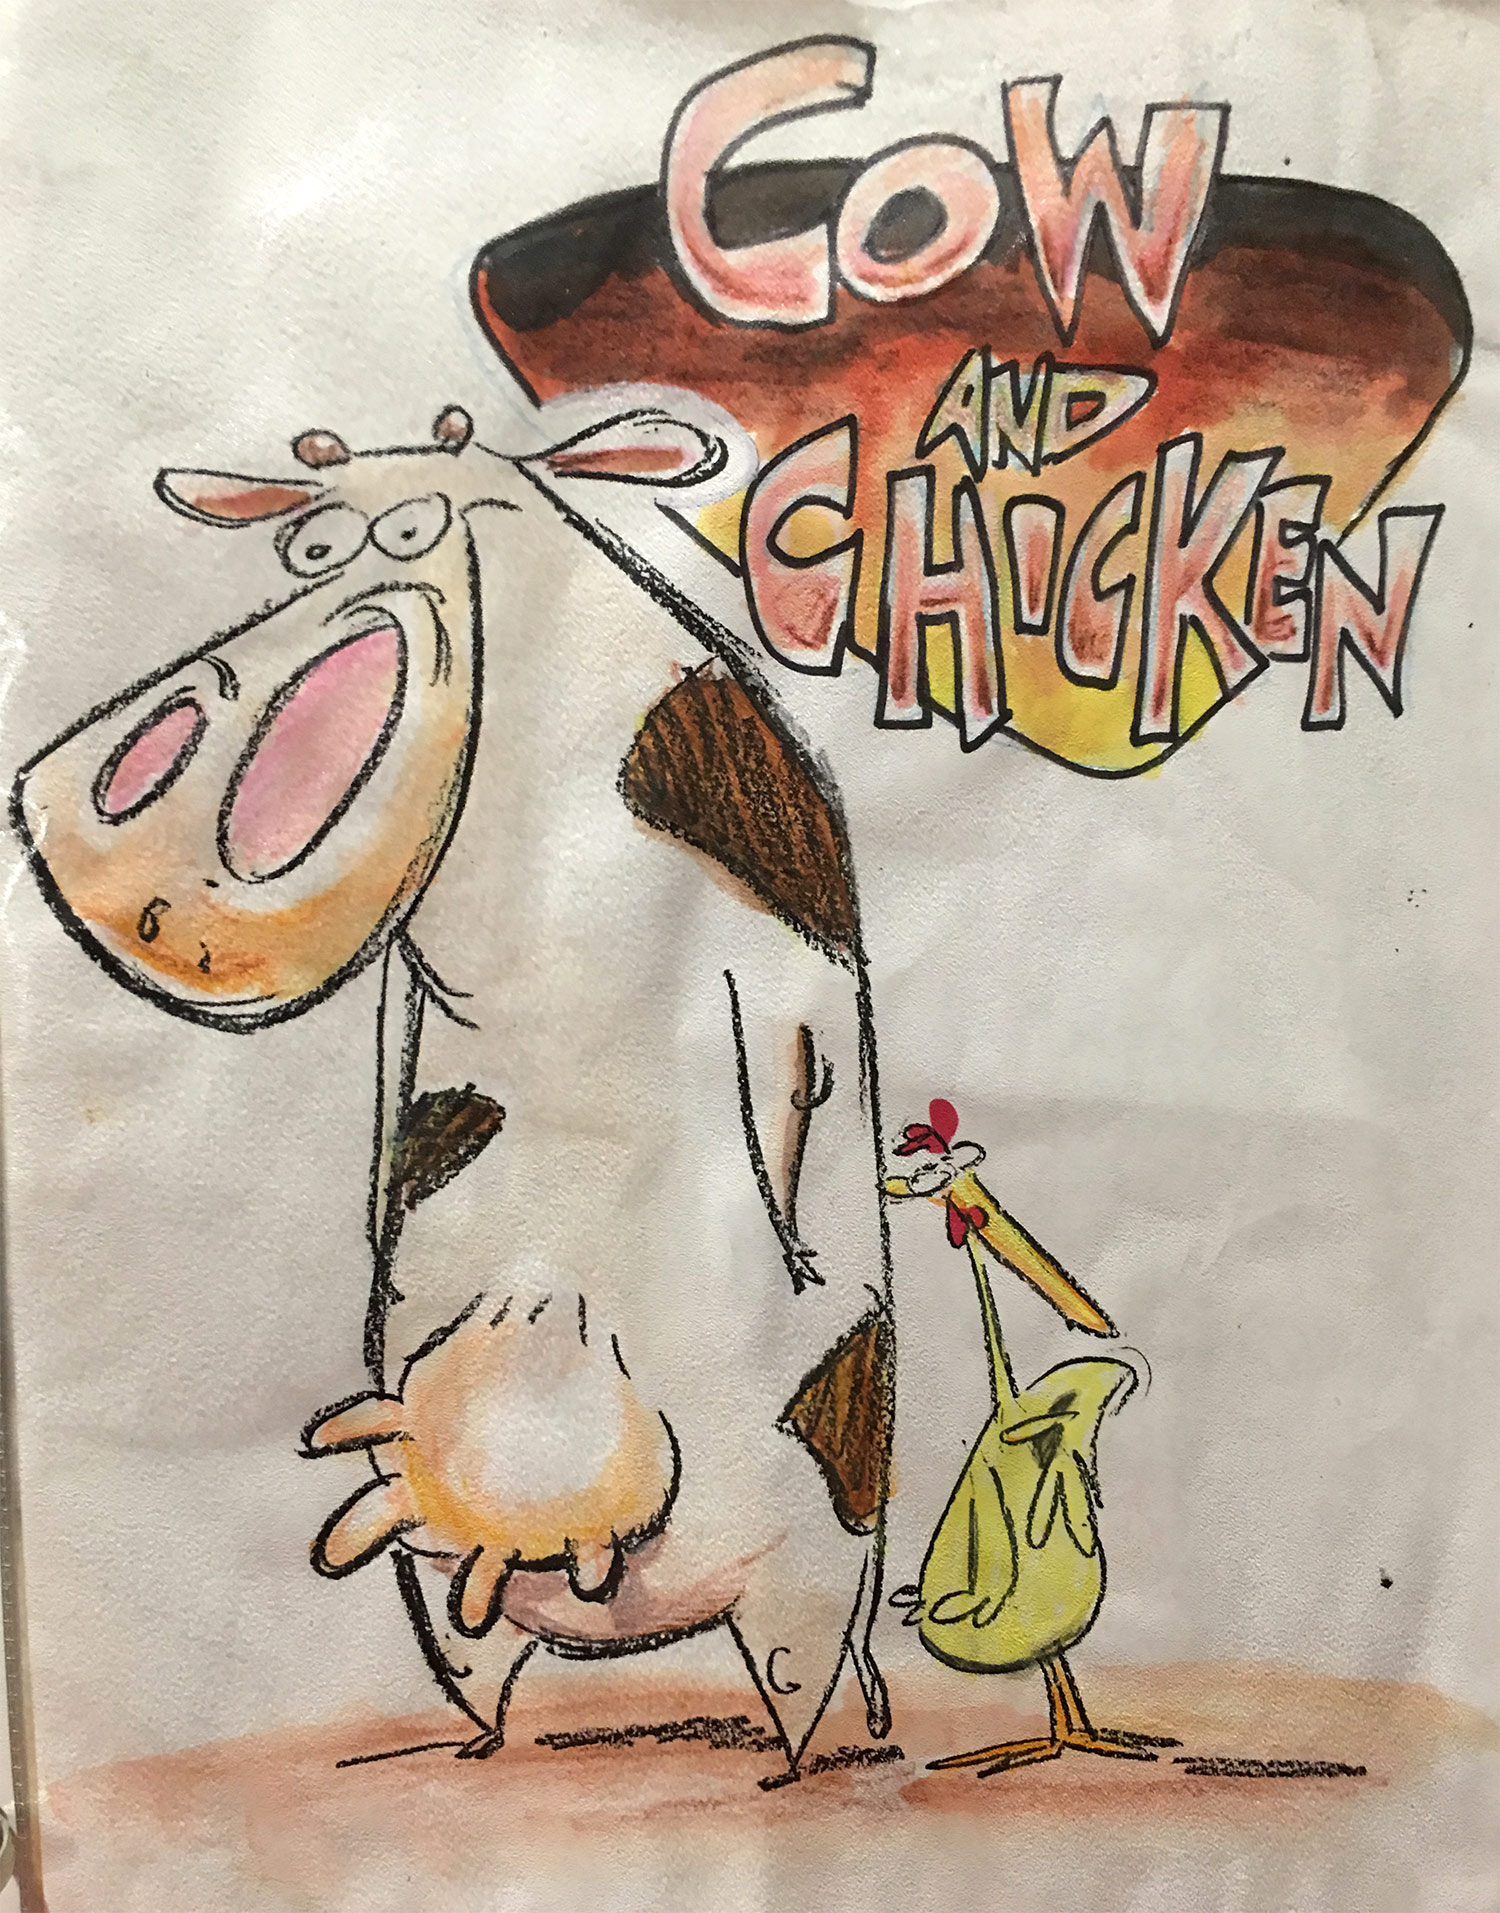 25 Years Of 'Cow & Chicken': A Conversation With Creator David Feiss